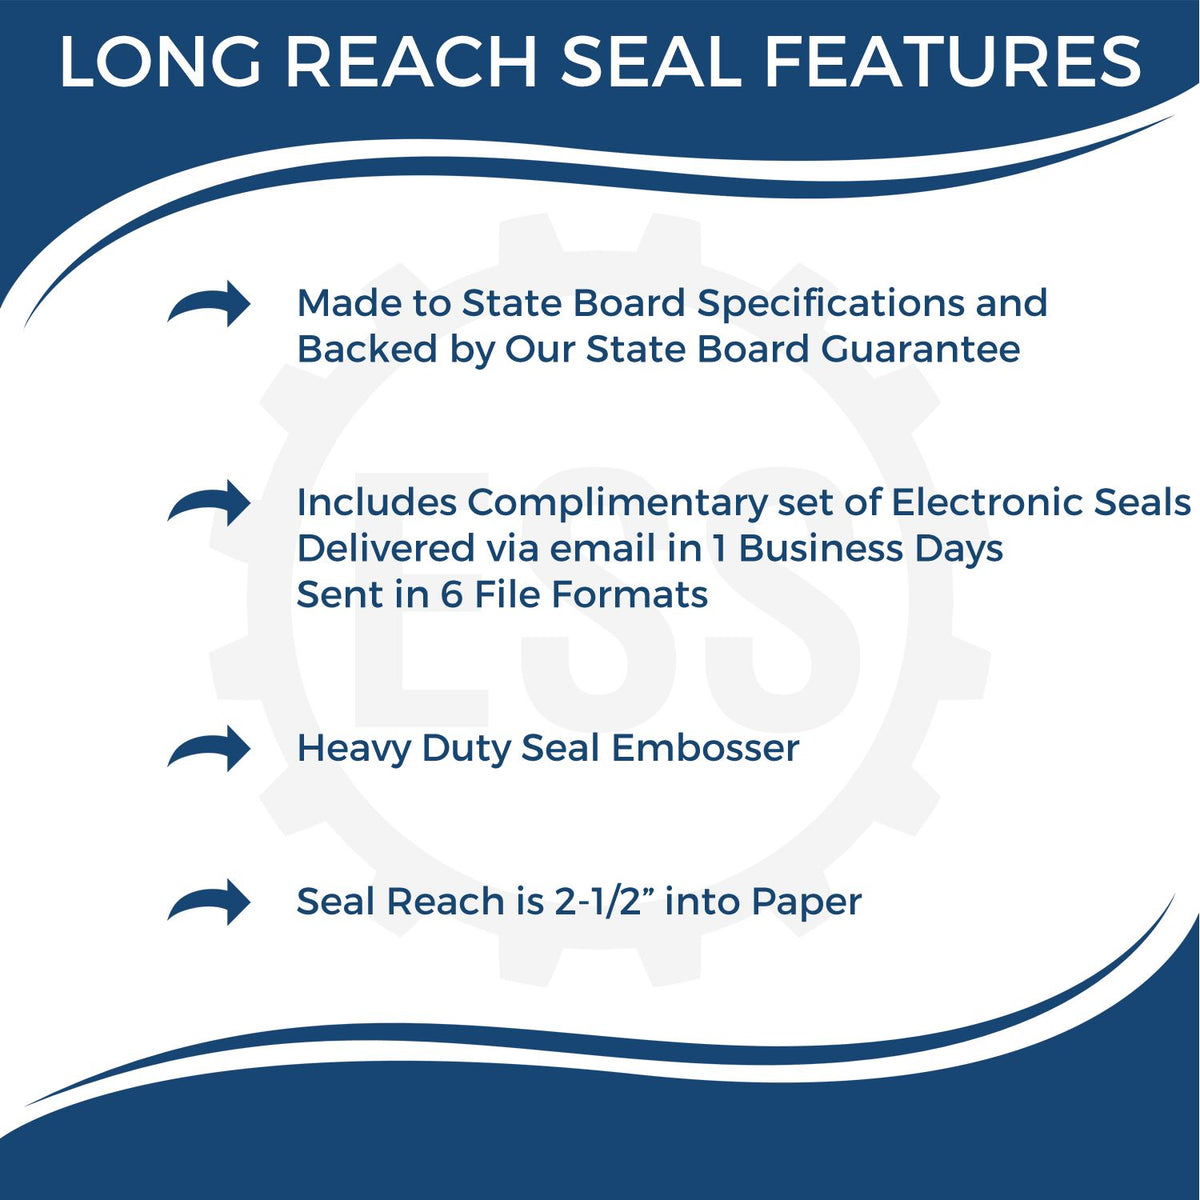 A picture of an infographic highlighting the selling points for the Long Reach Mississippi PE Seal